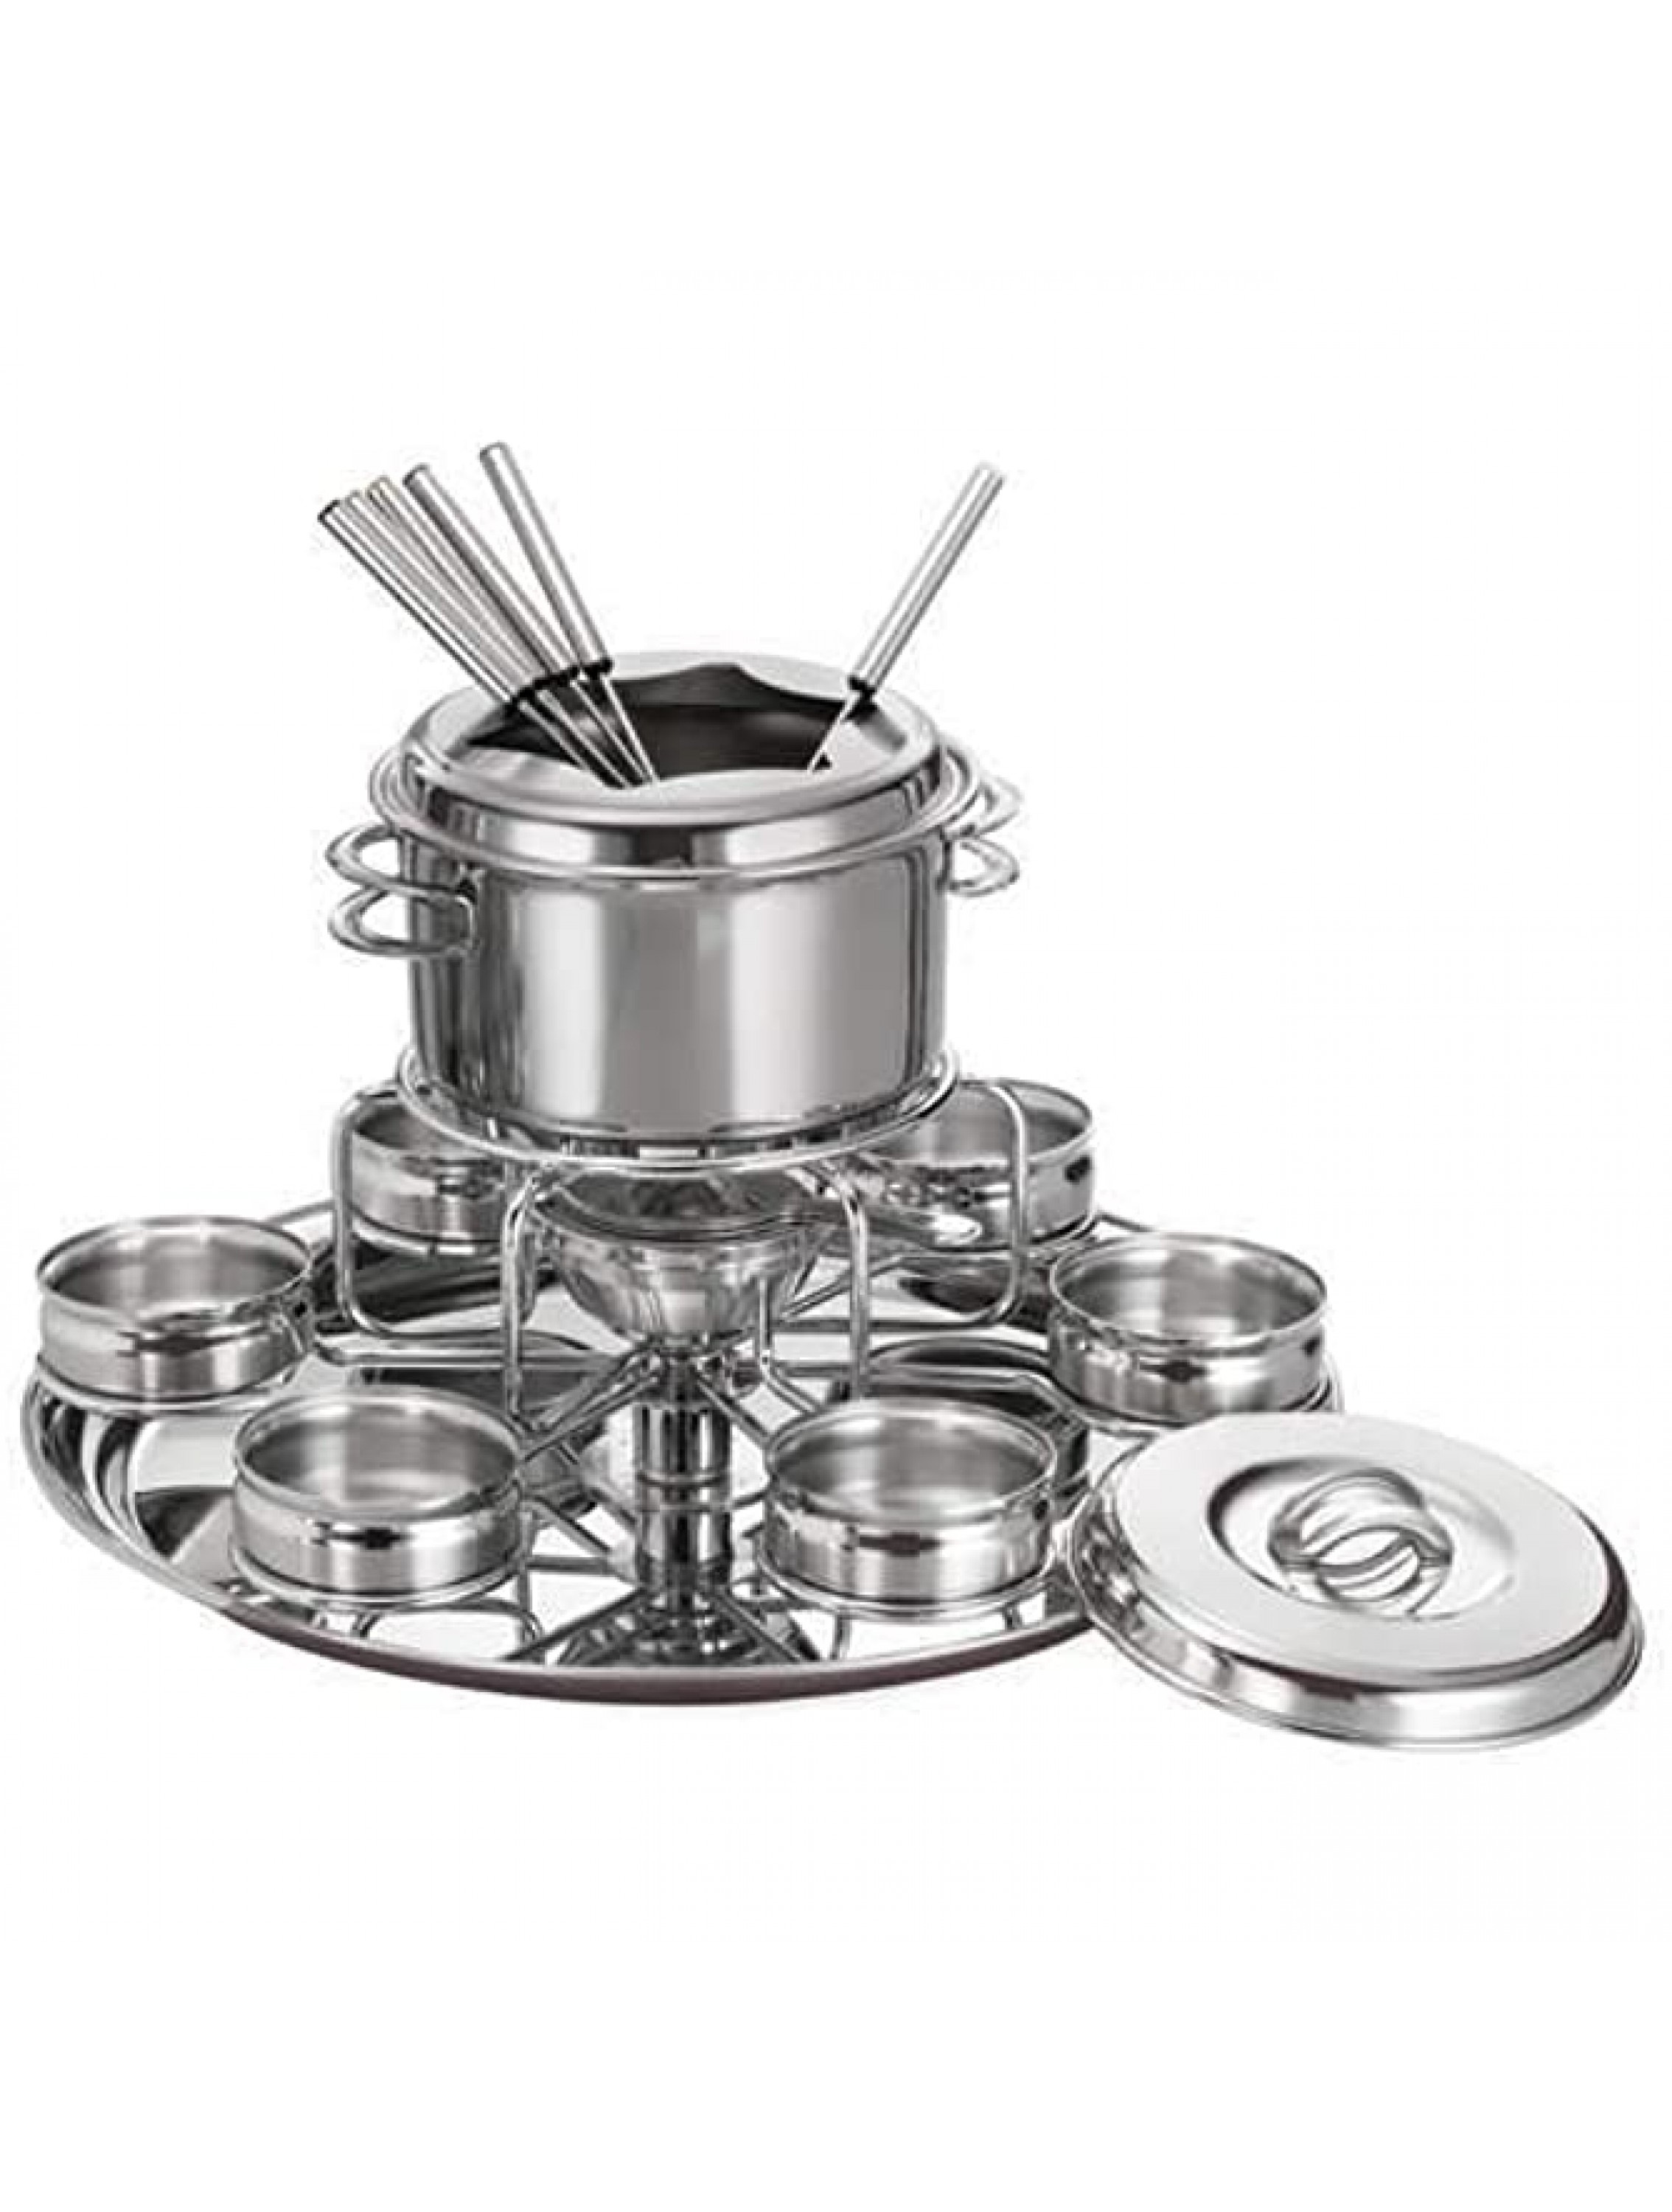 Tramontina Gourmet Collection Professional 16 Pc. Stainless Steel Fondue Set - BLPDP826U